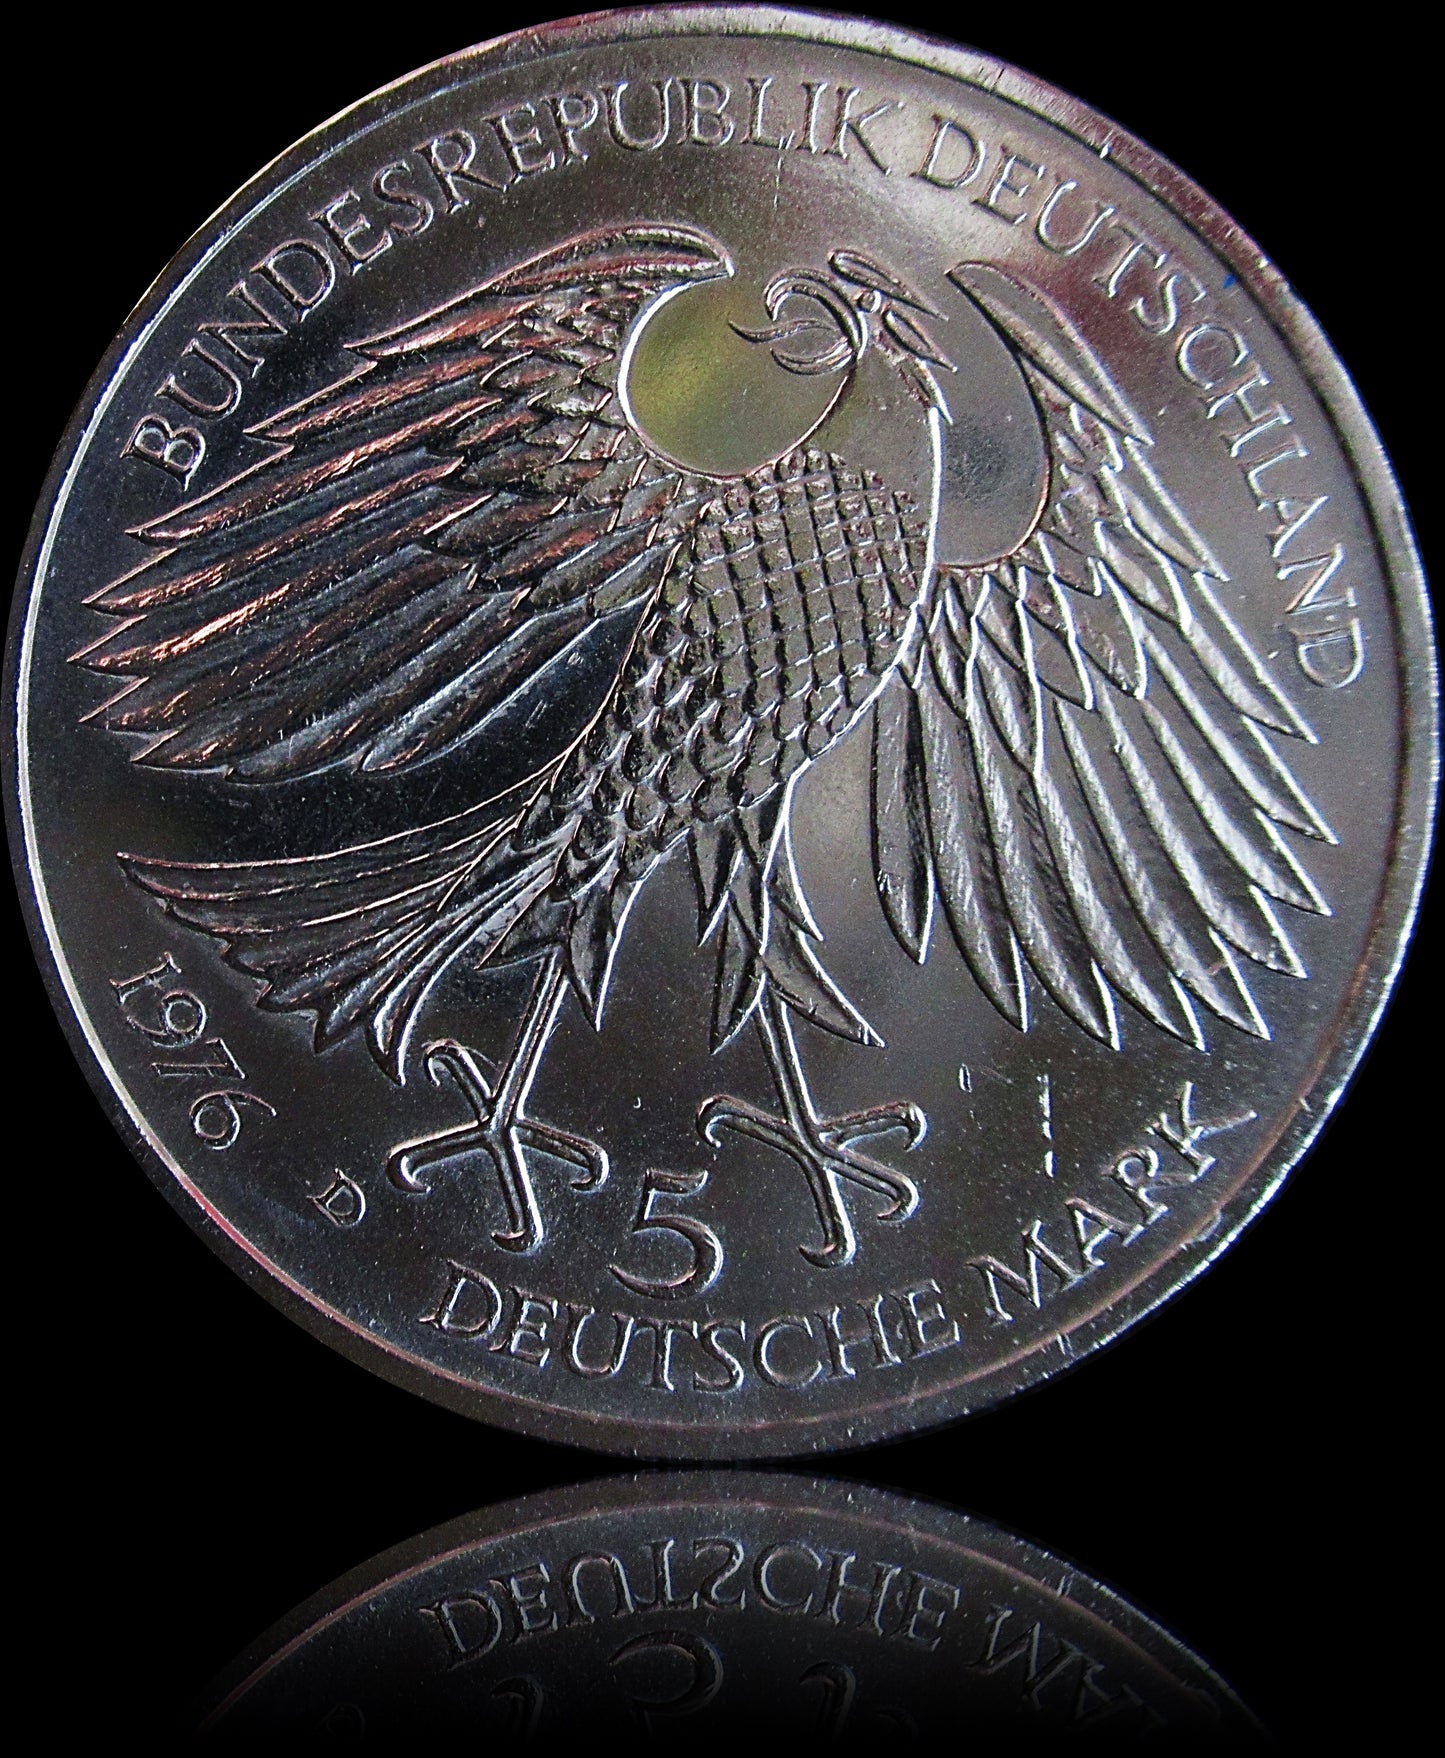 300TH ANNIVERSARY OF DEATH GRIMMELSHAUSEN, series 5 DM silver coin, 1976